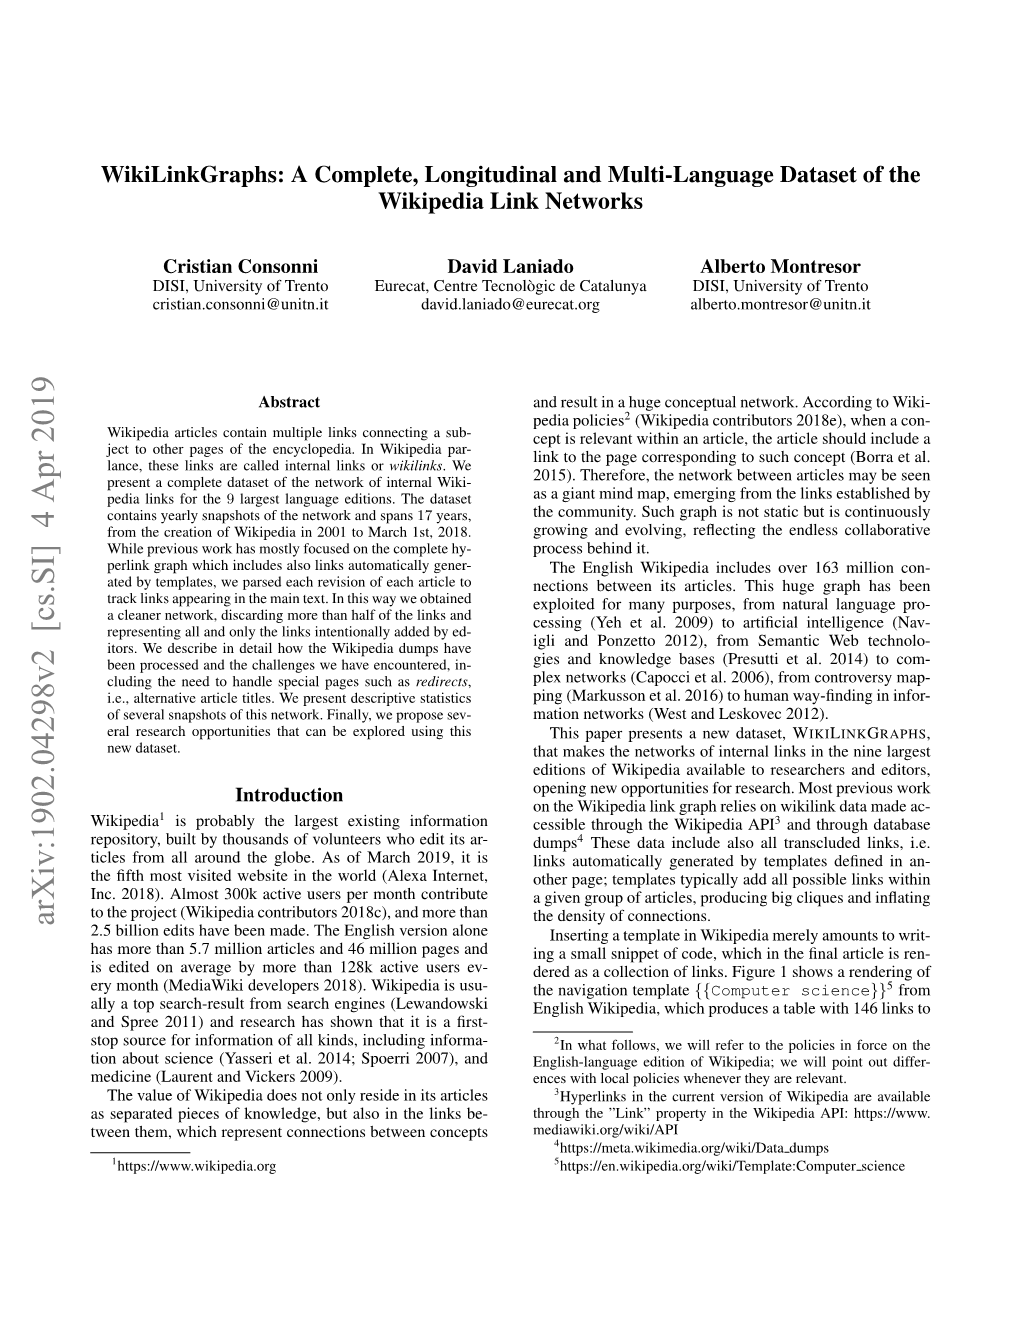 A Complete, Longitudinal and Multi-Language Dataset of the Wikipedia Link Networks